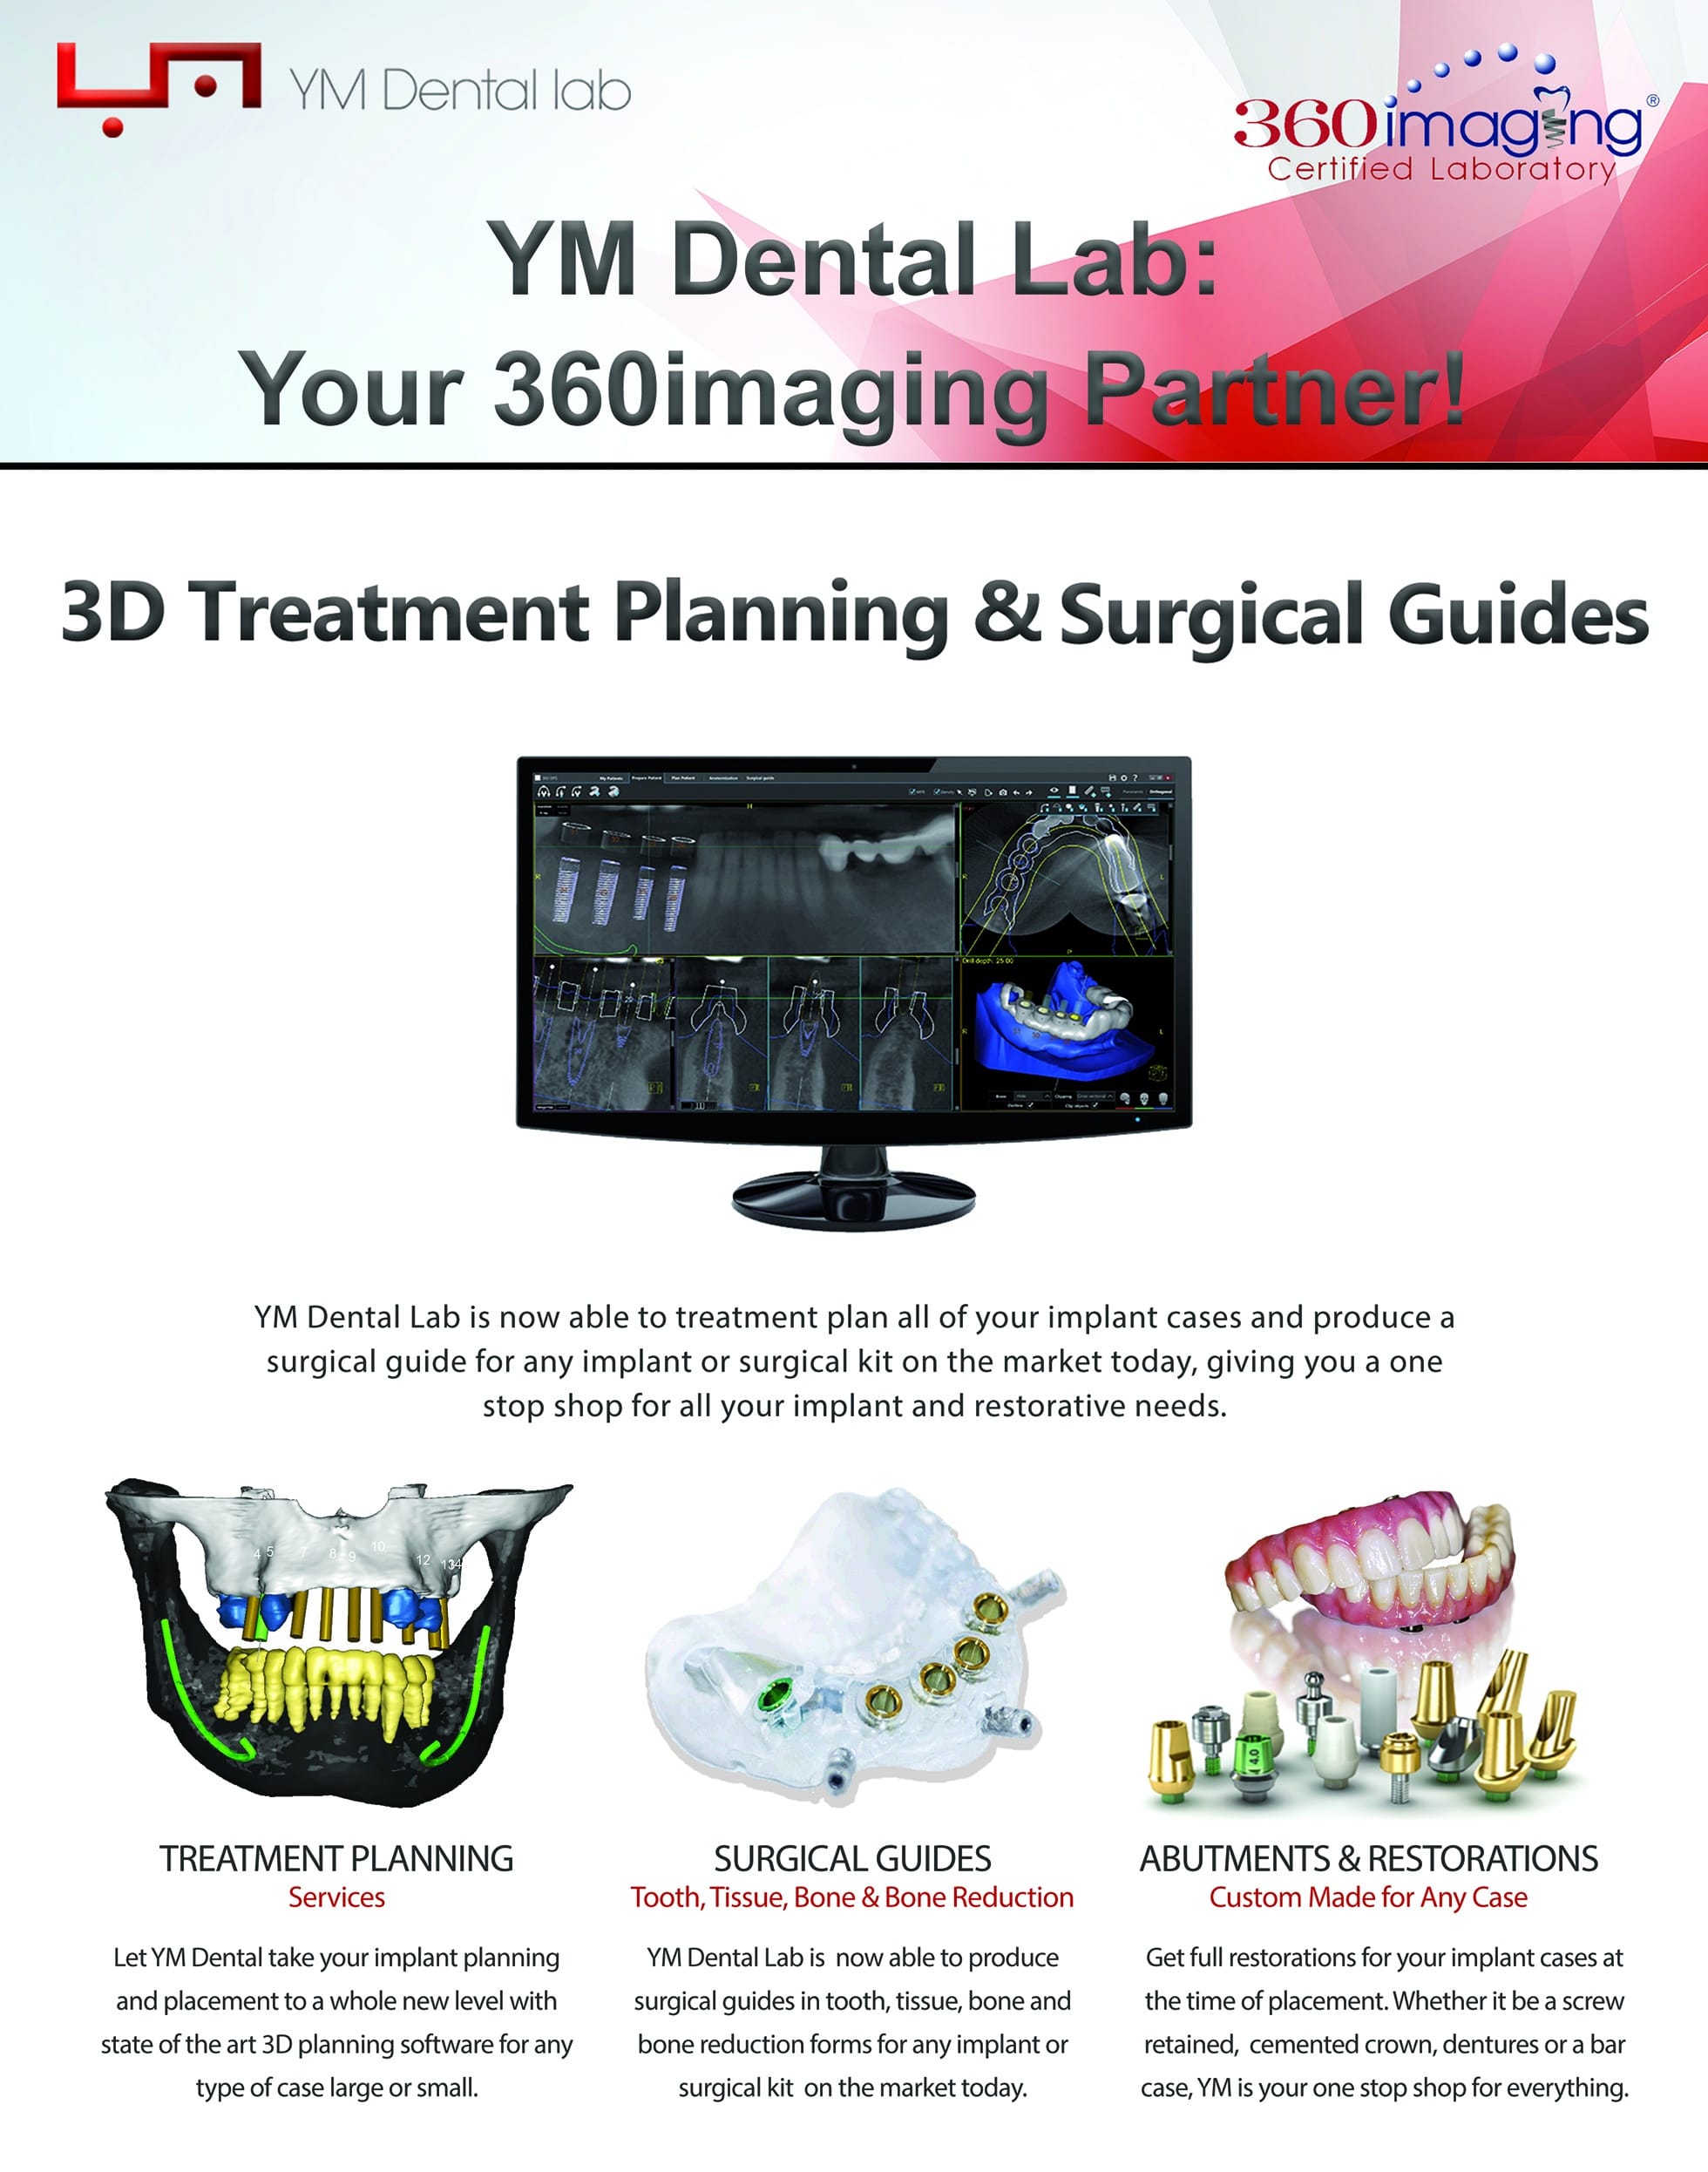 3D Treatment Planning & Surgical Guides